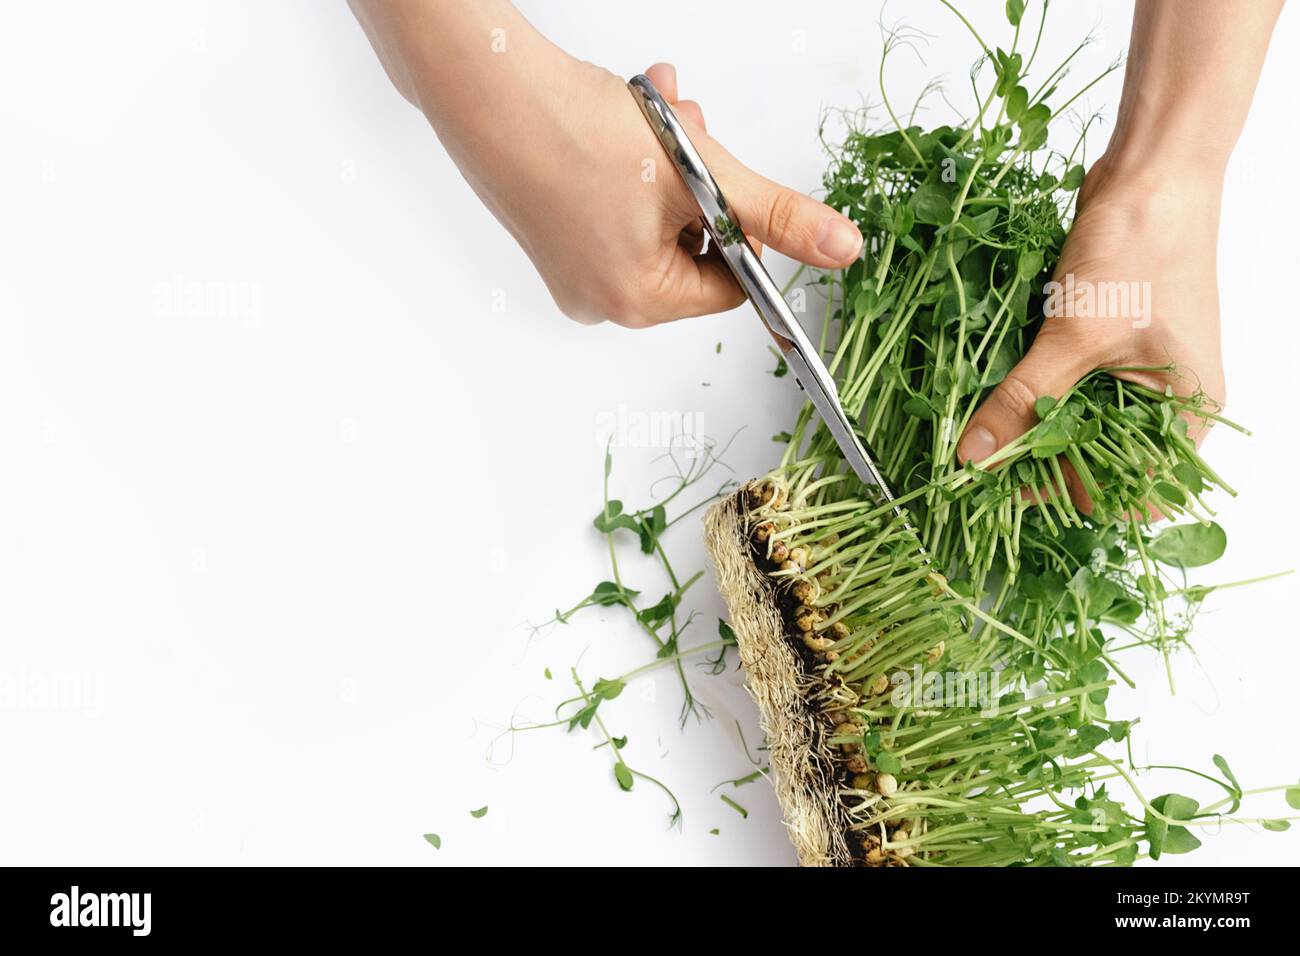 Female hands cuts sprouts of green microgreen peas from seeds and roots with metal scissors on white background. The concept of vegan and healthy eating. Germination of seeds at home. Copy Space. Stock Photo